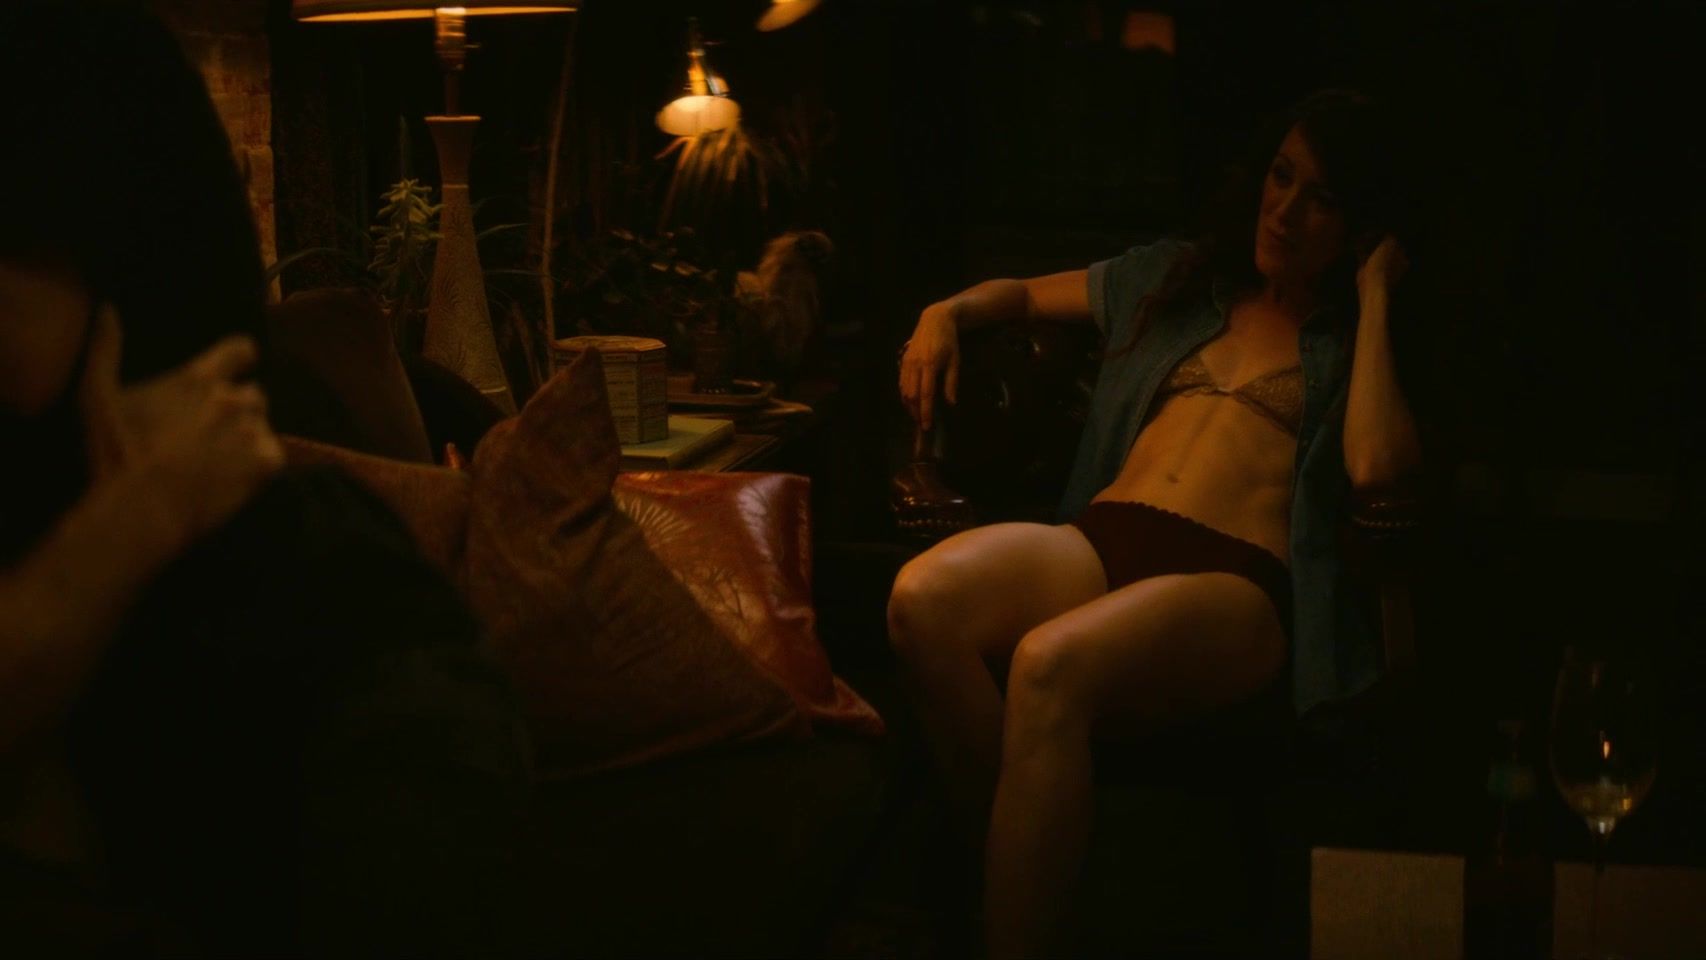 Arab Samantha Soule, Ellen Page nude - Tales of the City s01e02 (2019) Private